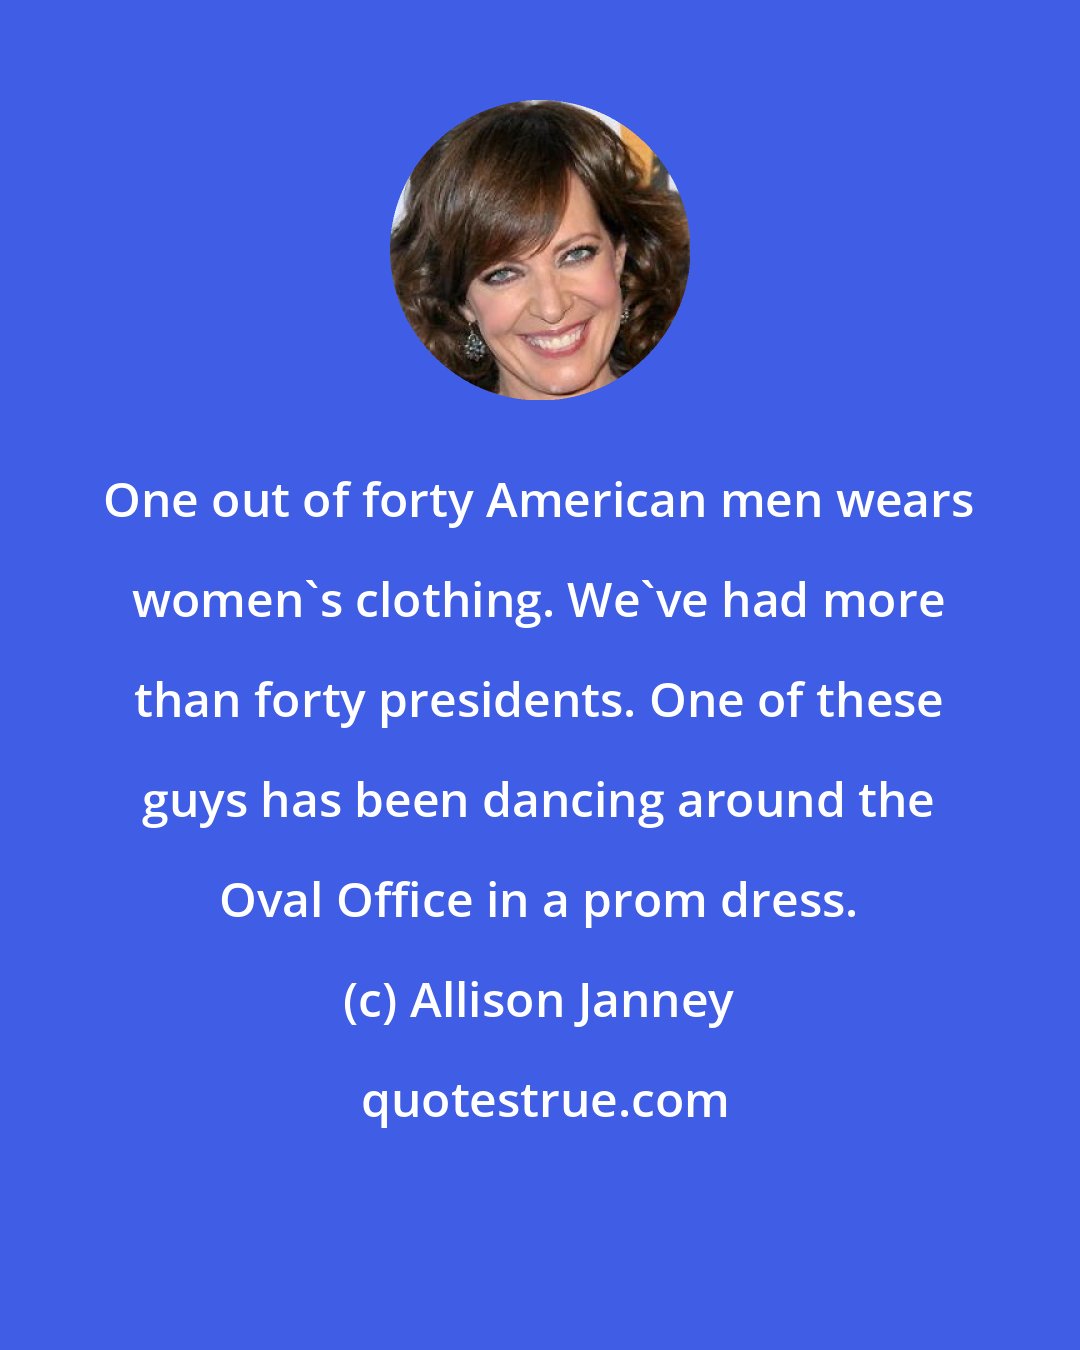 Allison Janney: One out of forty American men wears women's clothing. We've had more than forty presidents. One of these guys has been dancing around the Oval Office in a prom dress.